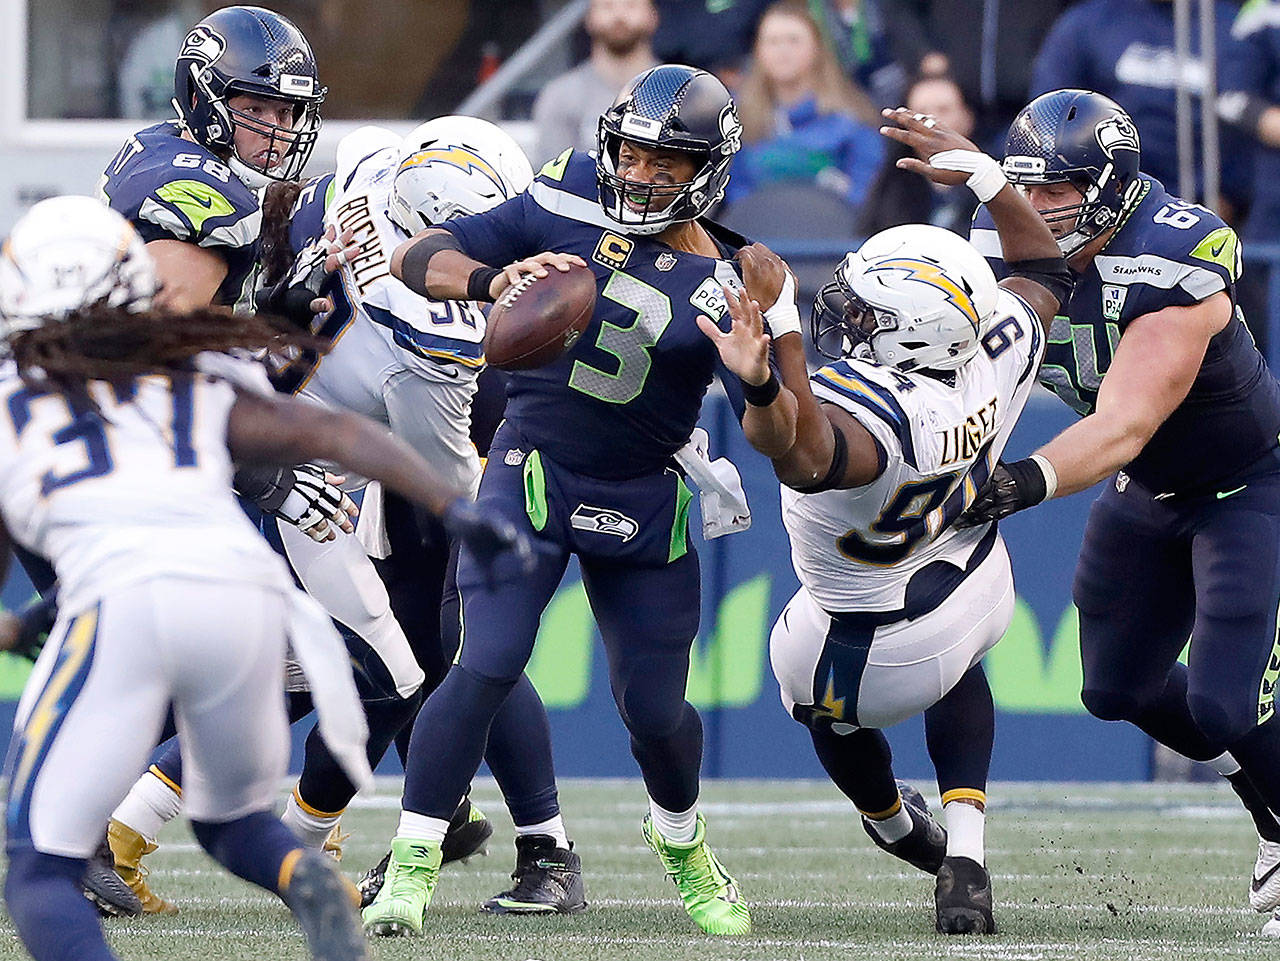 Seahawks lose game (and identity) in home letdown against streaking Chargers